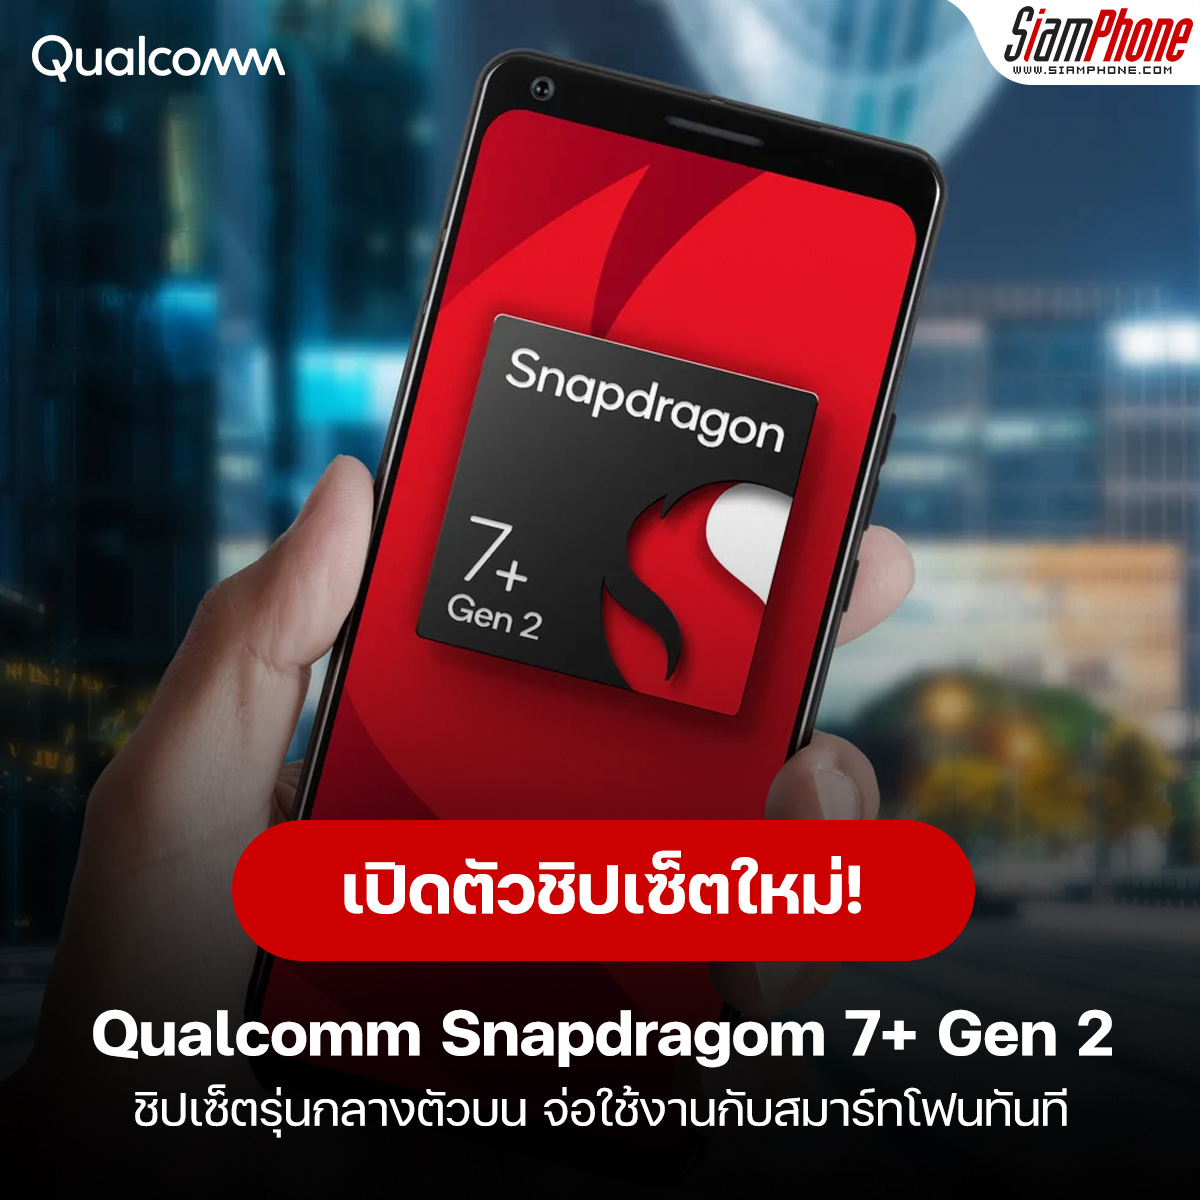 Introduces Qualcomm Snapdragom 7+ Gen 2, the upper mid-range chipset.  Immediate use with smartphones